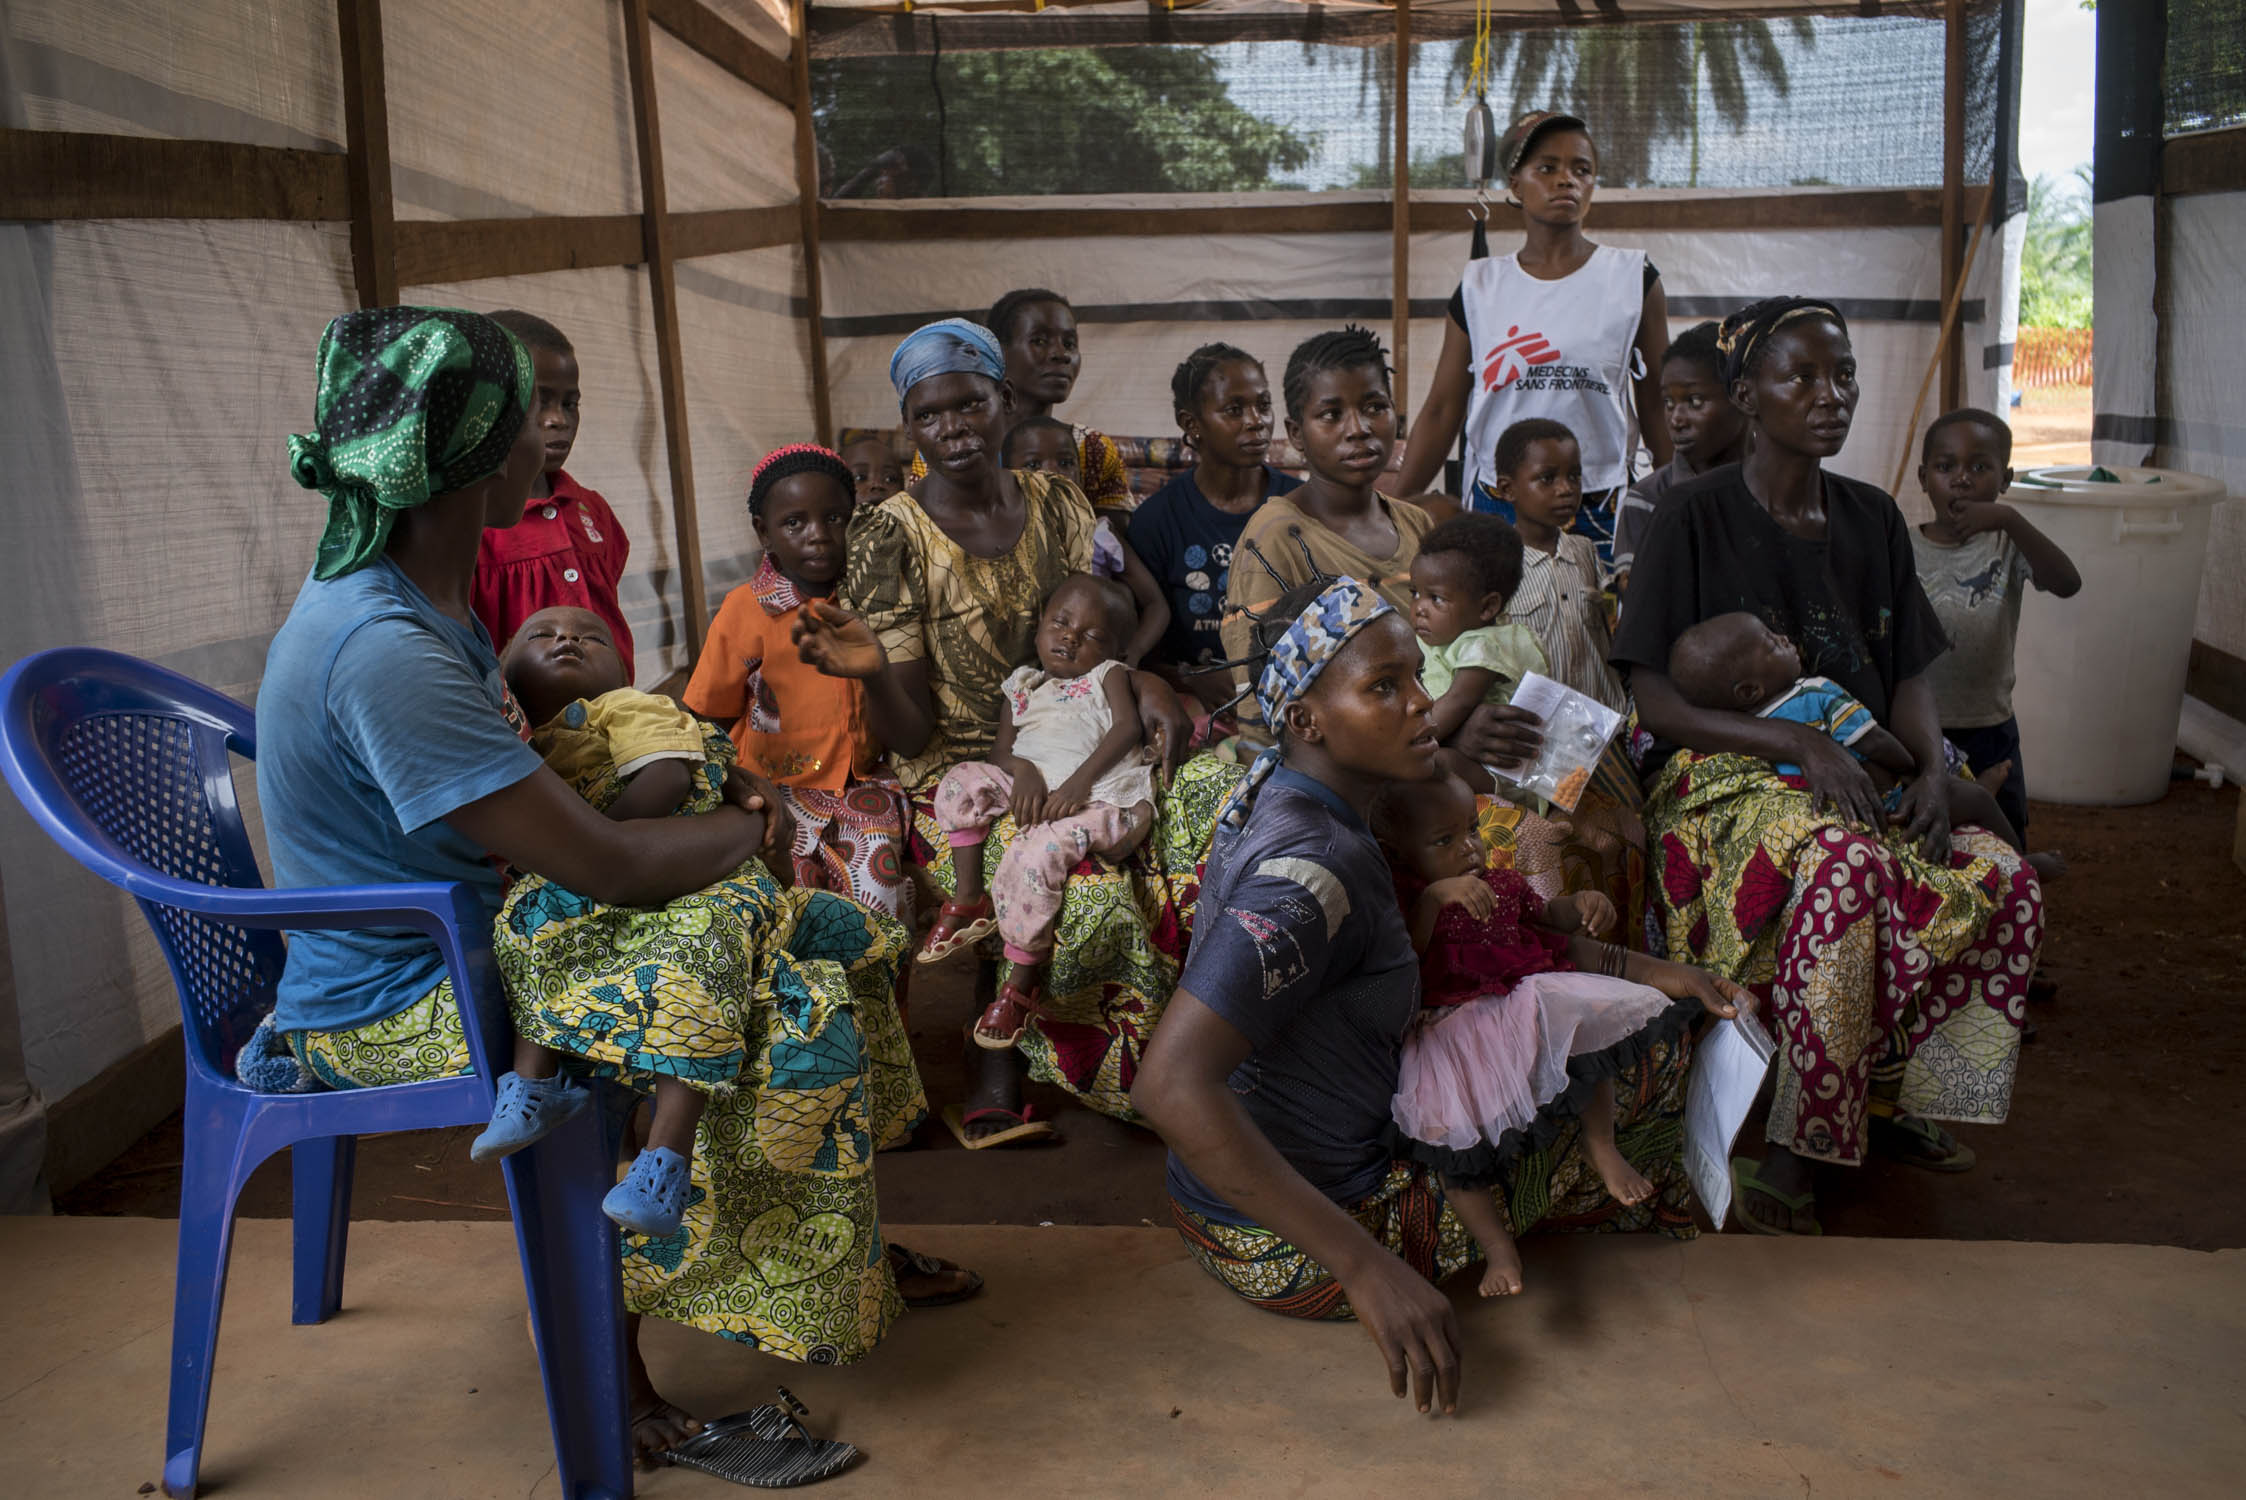  Mothers hold their sick children in the crowded waiting room of the MSF wing at a hospital in Monga, a town in a remote northern region of Democratic Republic of the Congo. MSF arrived to the area in response to a measles epidemic, therefore, only c